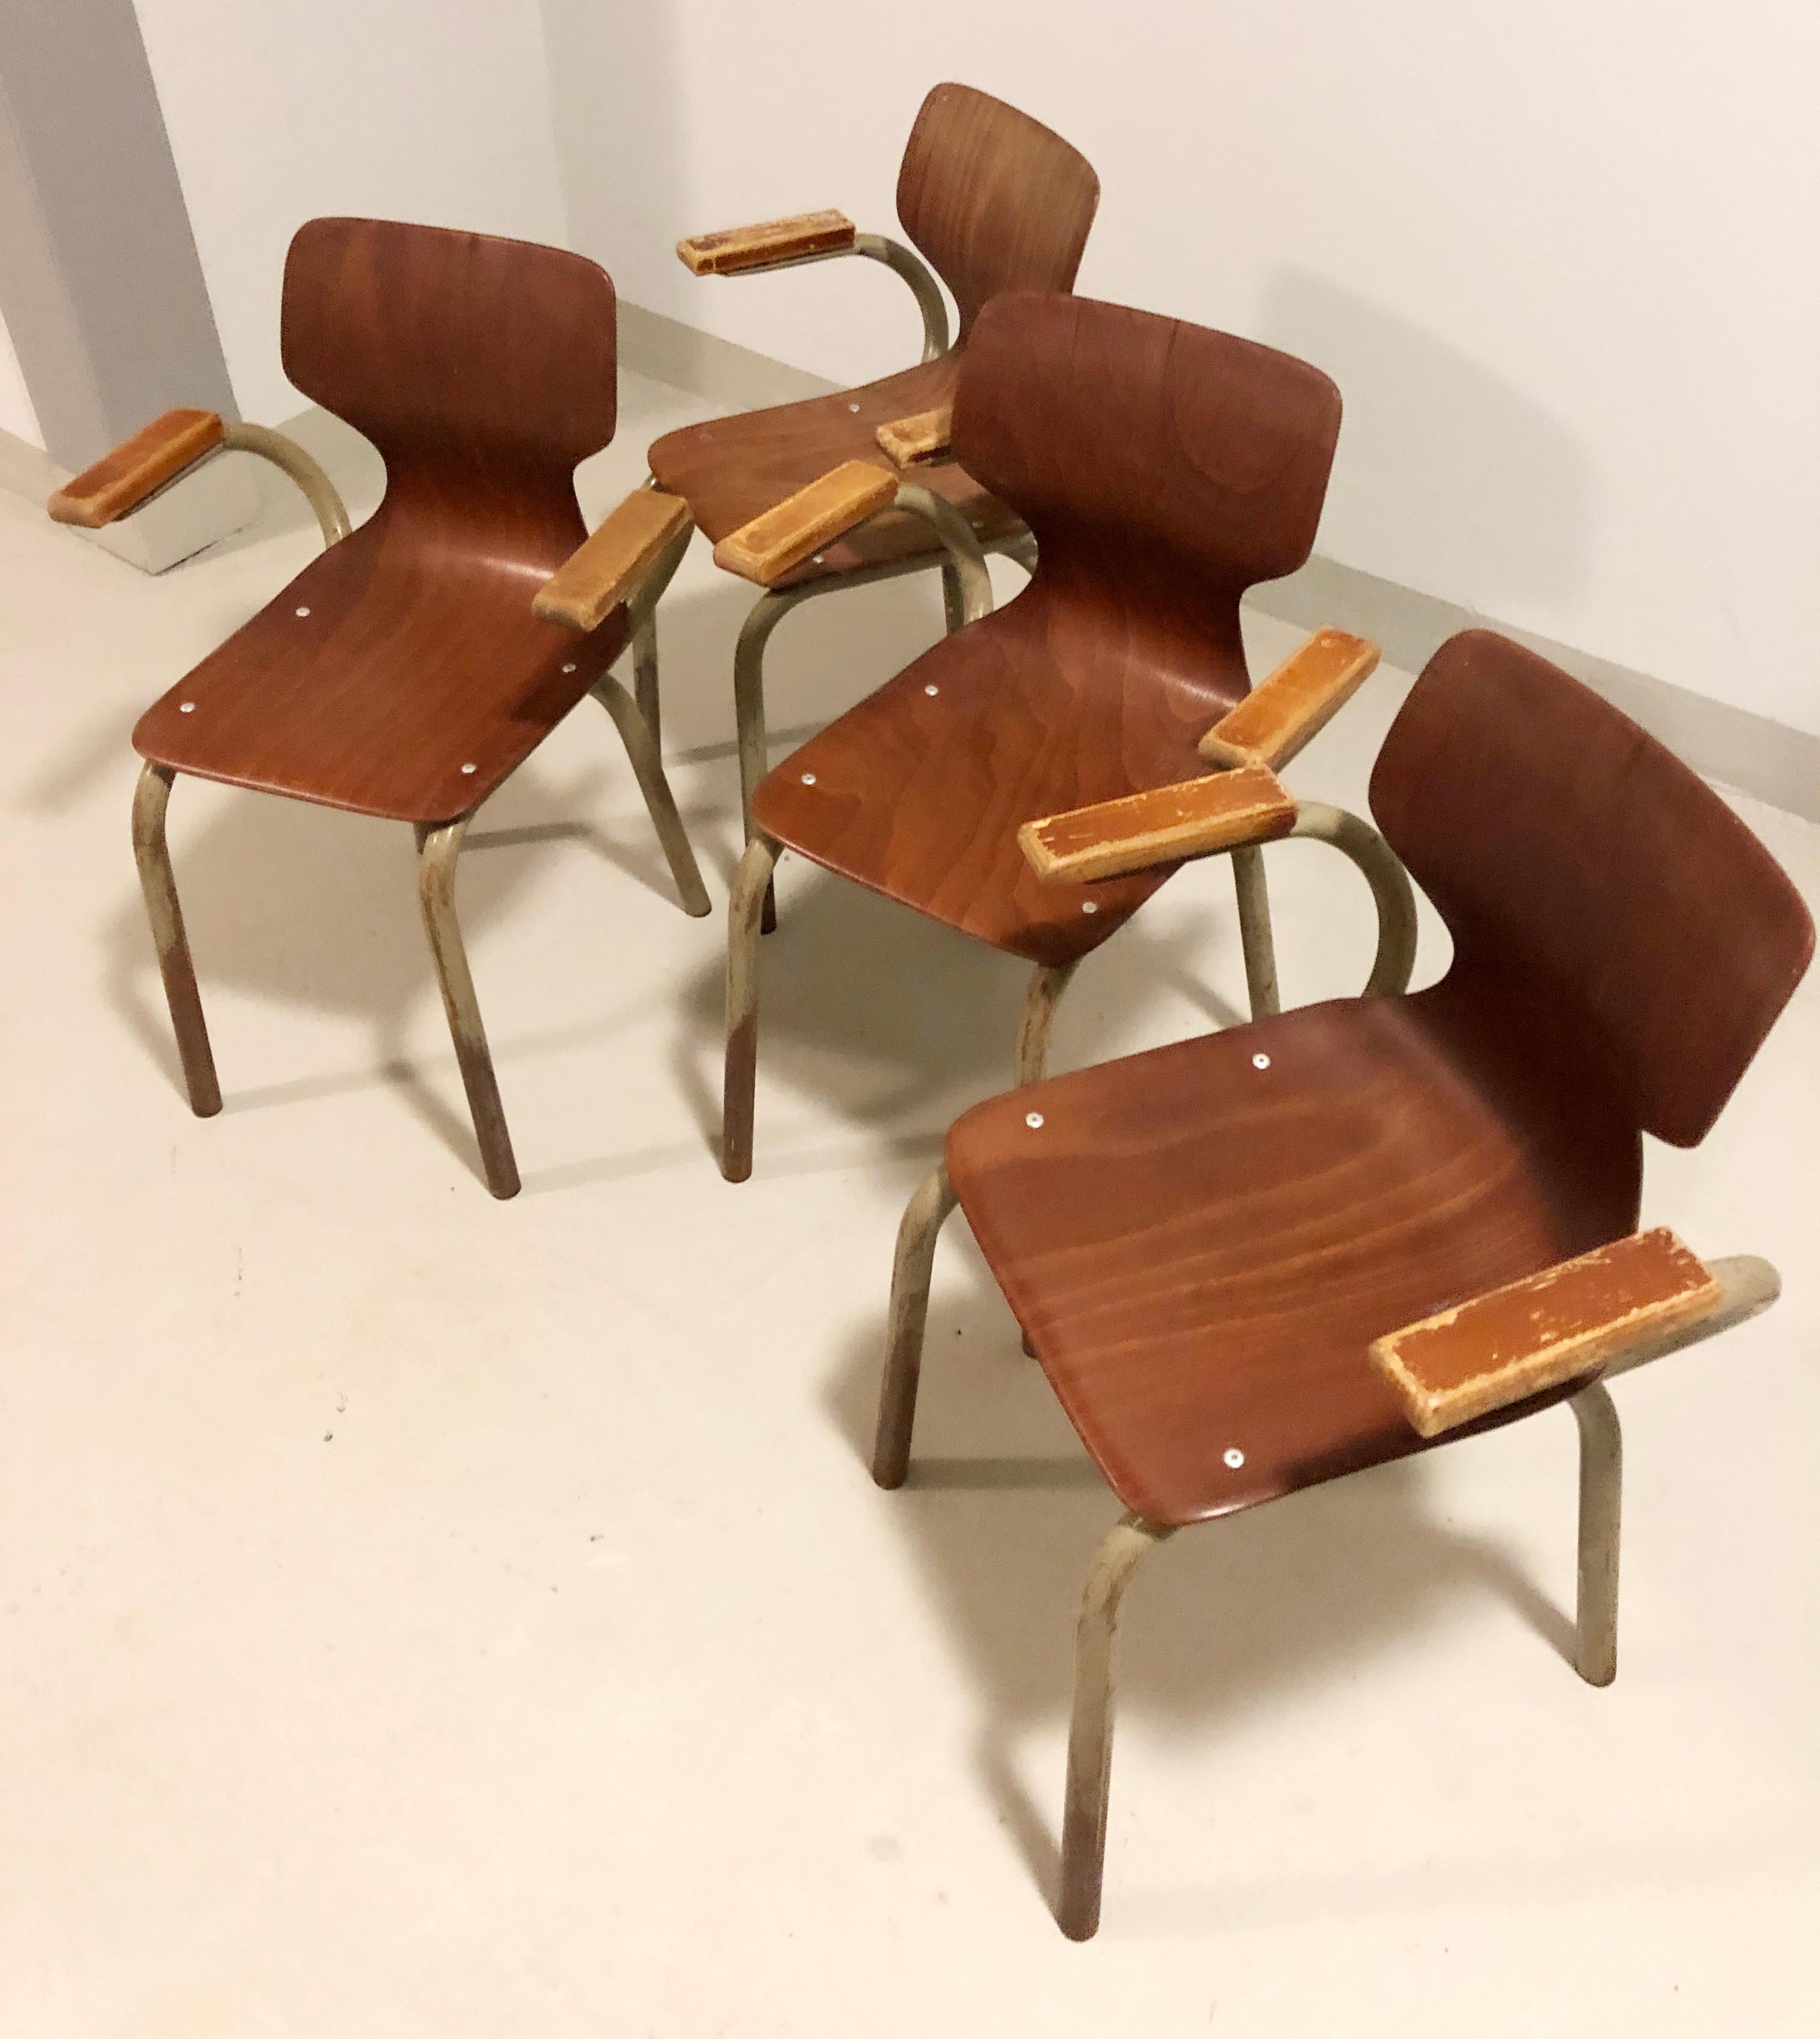 Industrial children chairs - Willy van der Meeren for Tubax - Pagholz 1970's For Sale 7